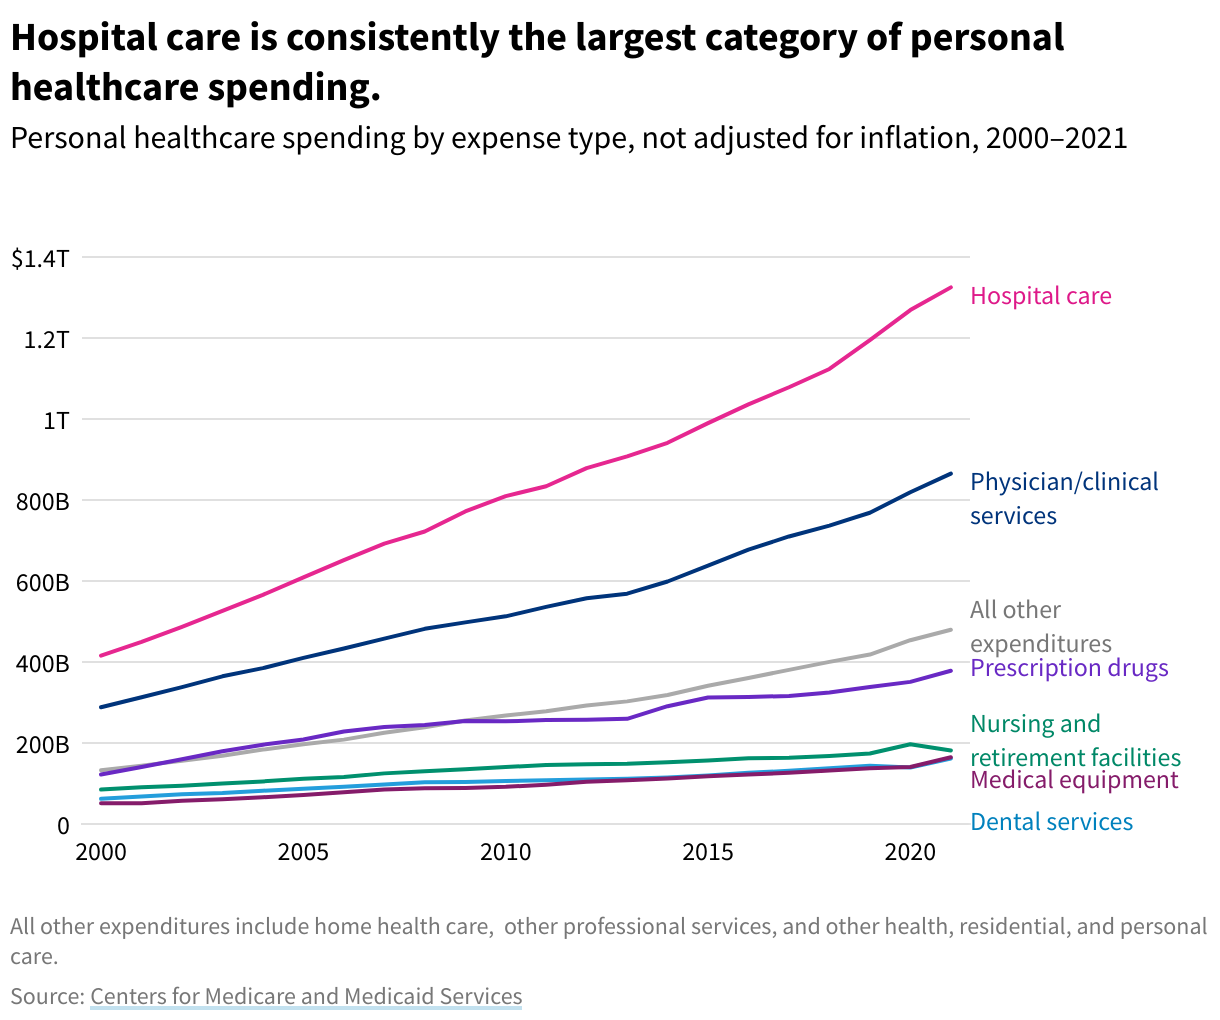 Line chart of personal healthcare spending by expense type, not adjusted for inflation from 2000 to 2021.All lines have an upward trend, though hospital care is the highest category.